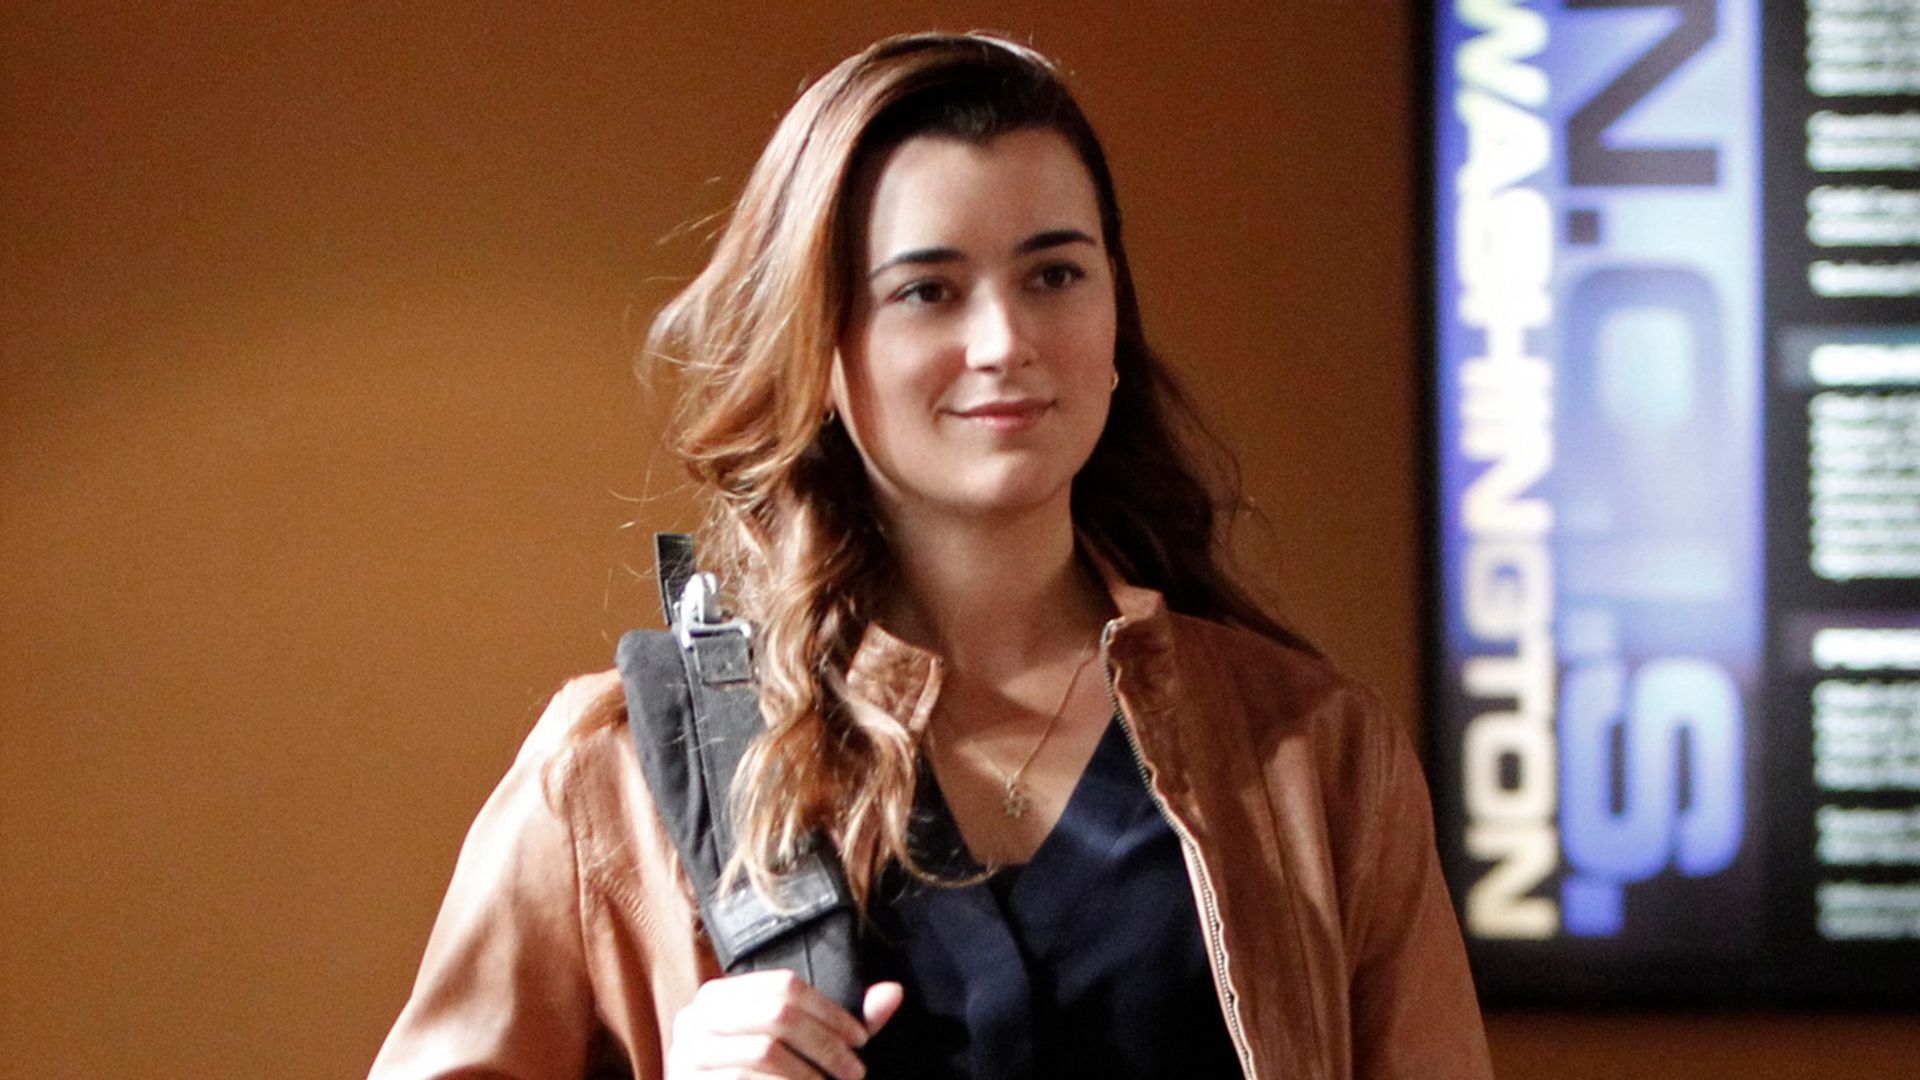 NCIS star Cote de Pablo makes rare return to screens ahead of spin-off show – fans react